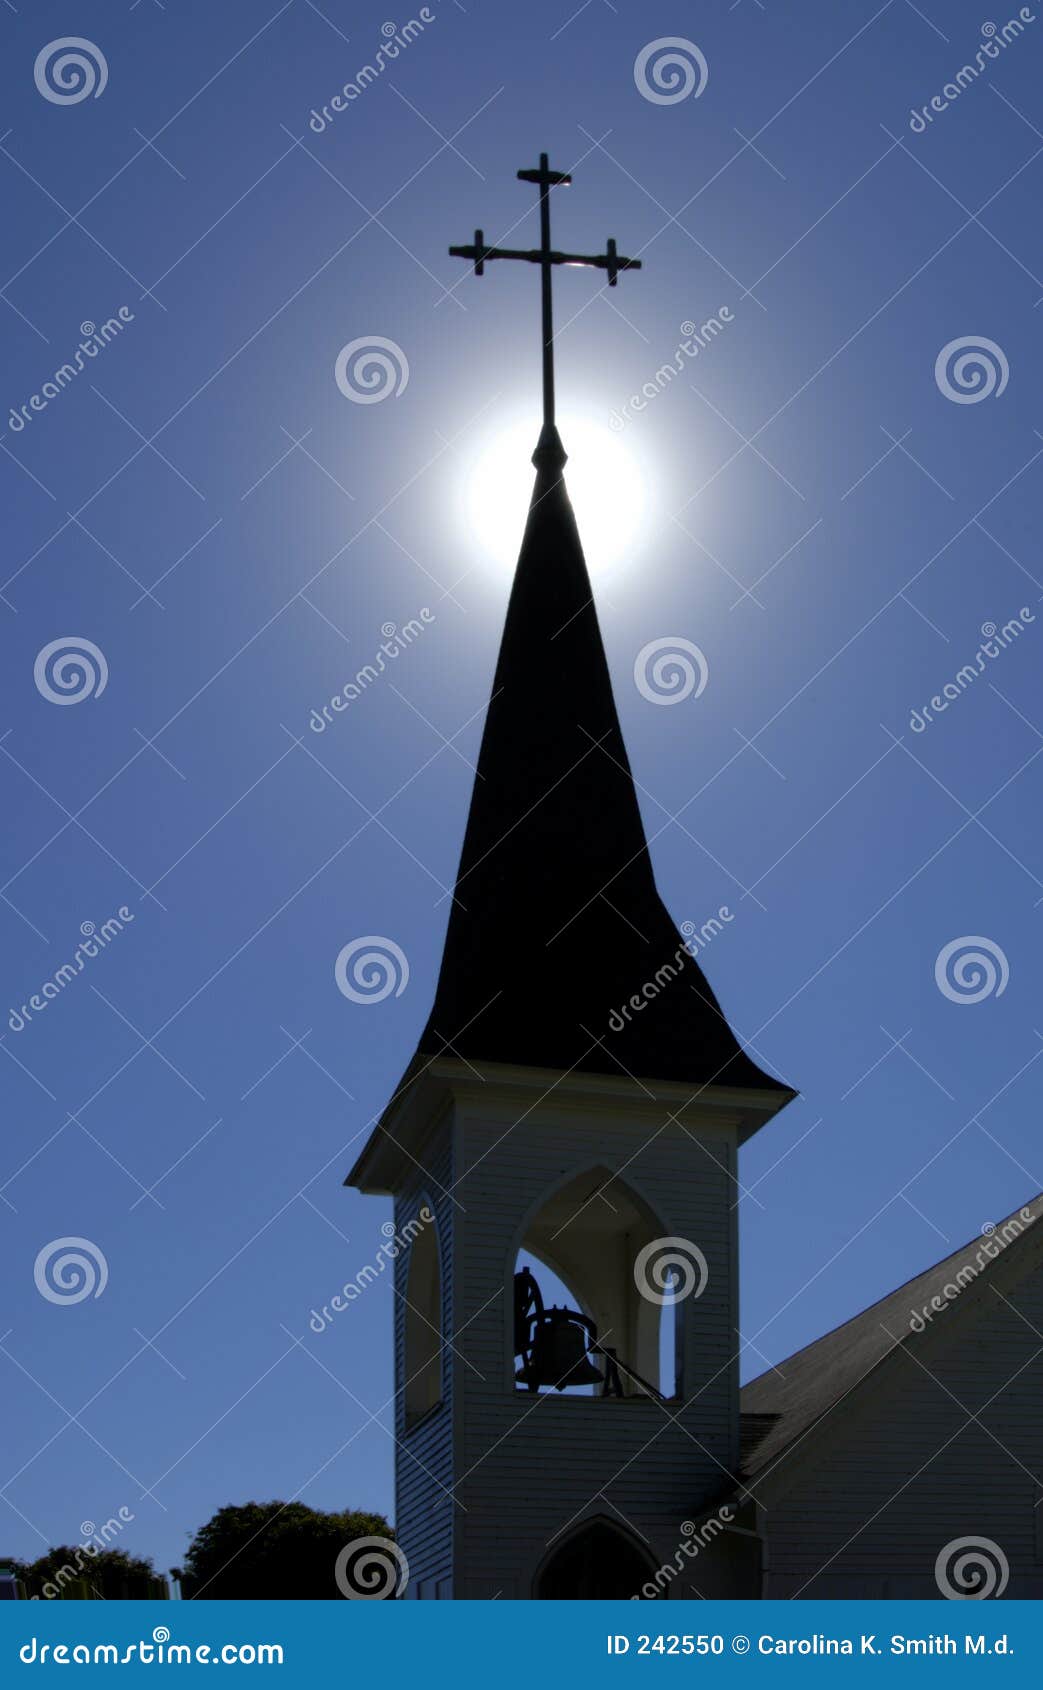 church spire and belfry